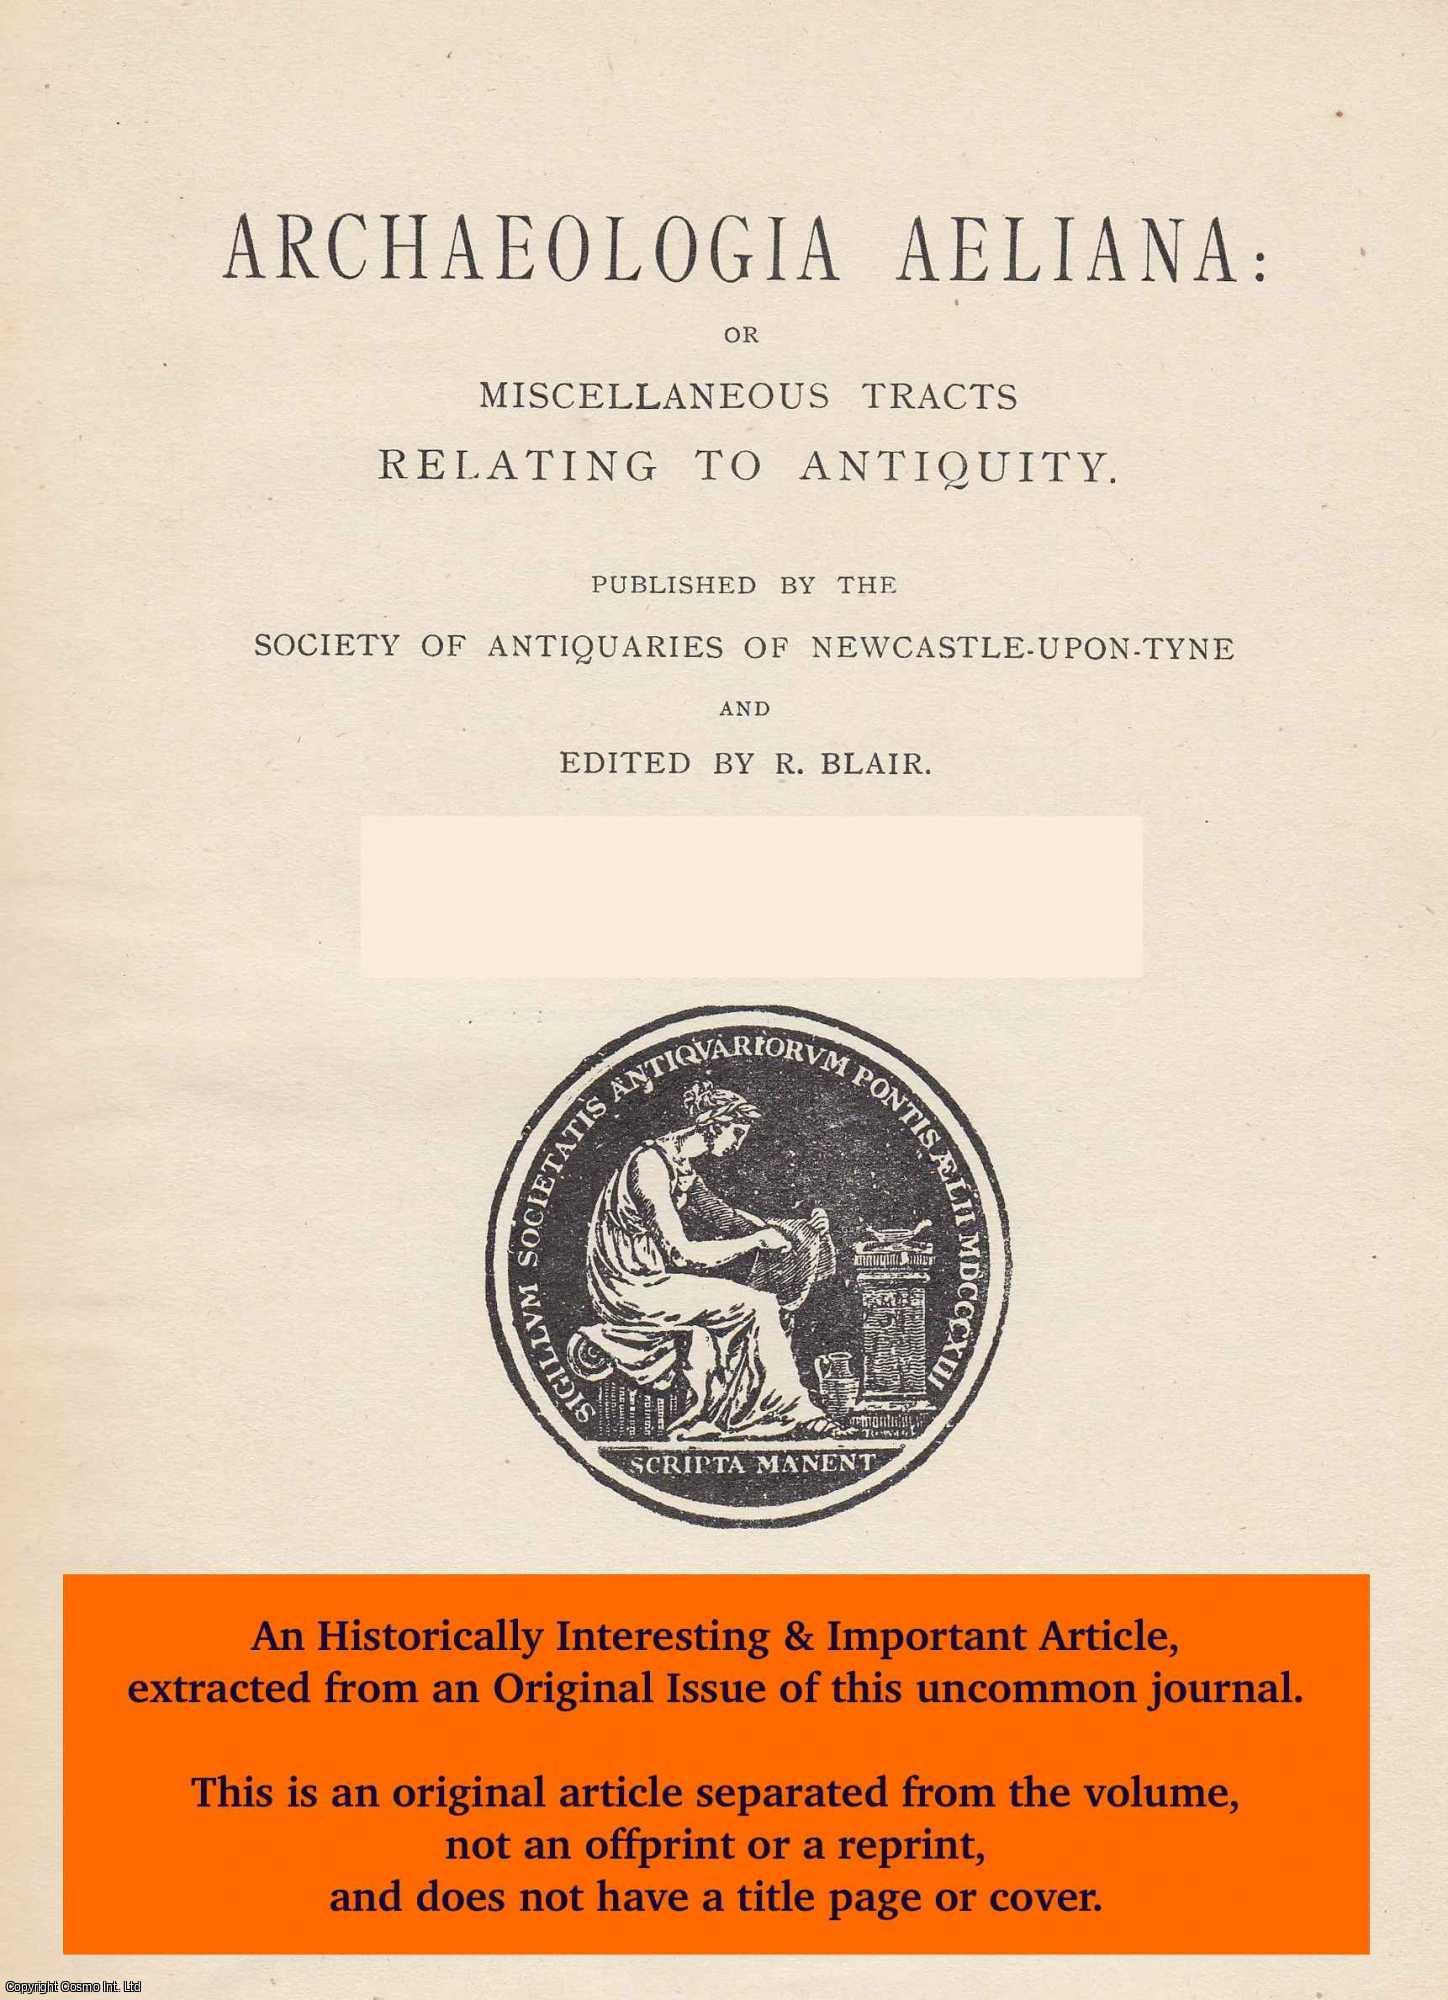 Richard Welford, Richard - Art and Archaeology: The Three Richardsons. An original article from The Archaeologia Aeliana: or Miscellaneous Tracts Relating to Antiquity, 1907.